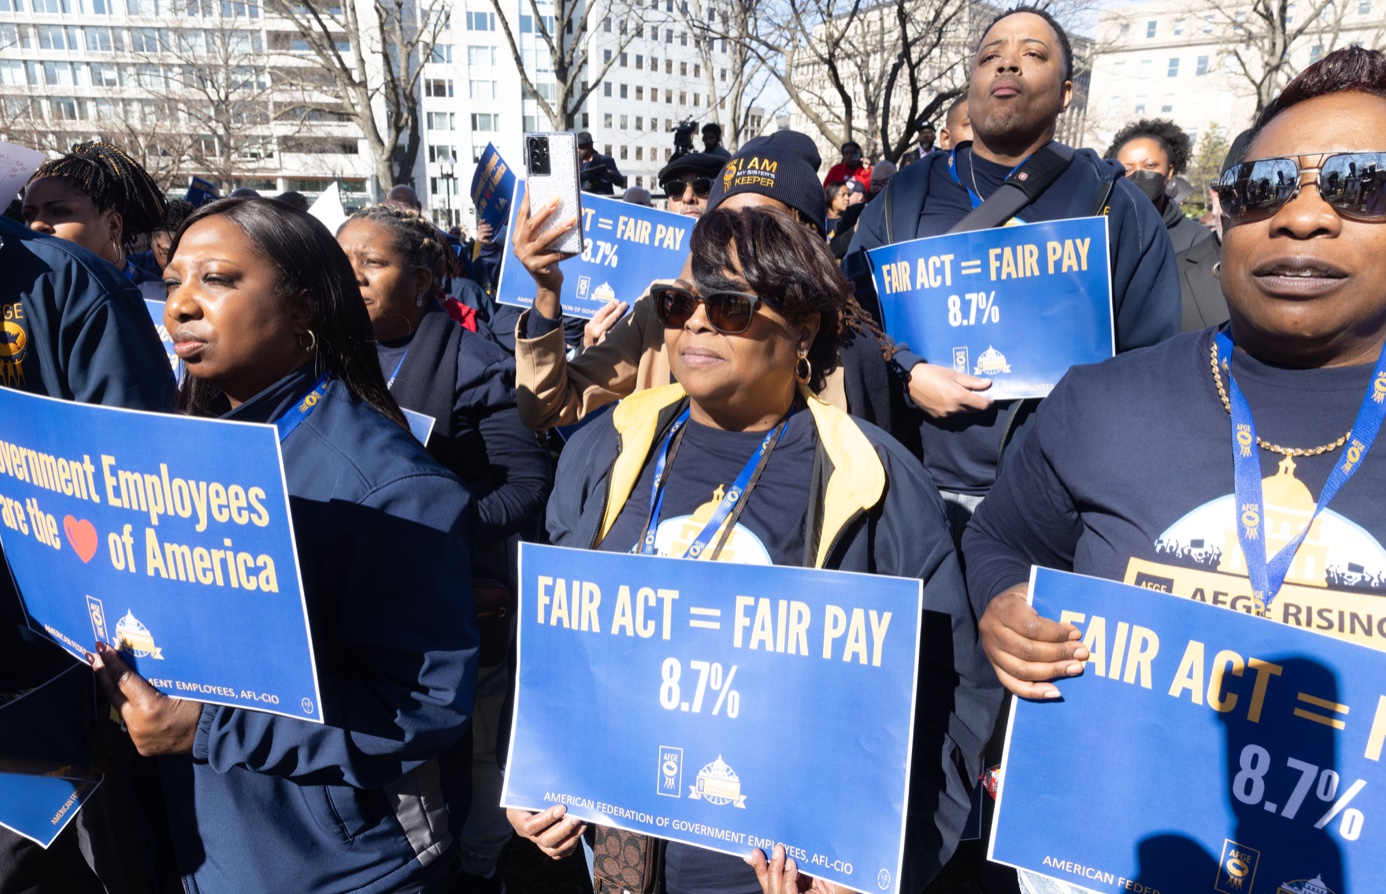 Protesters for fair pay; image courtesy of AFGE.